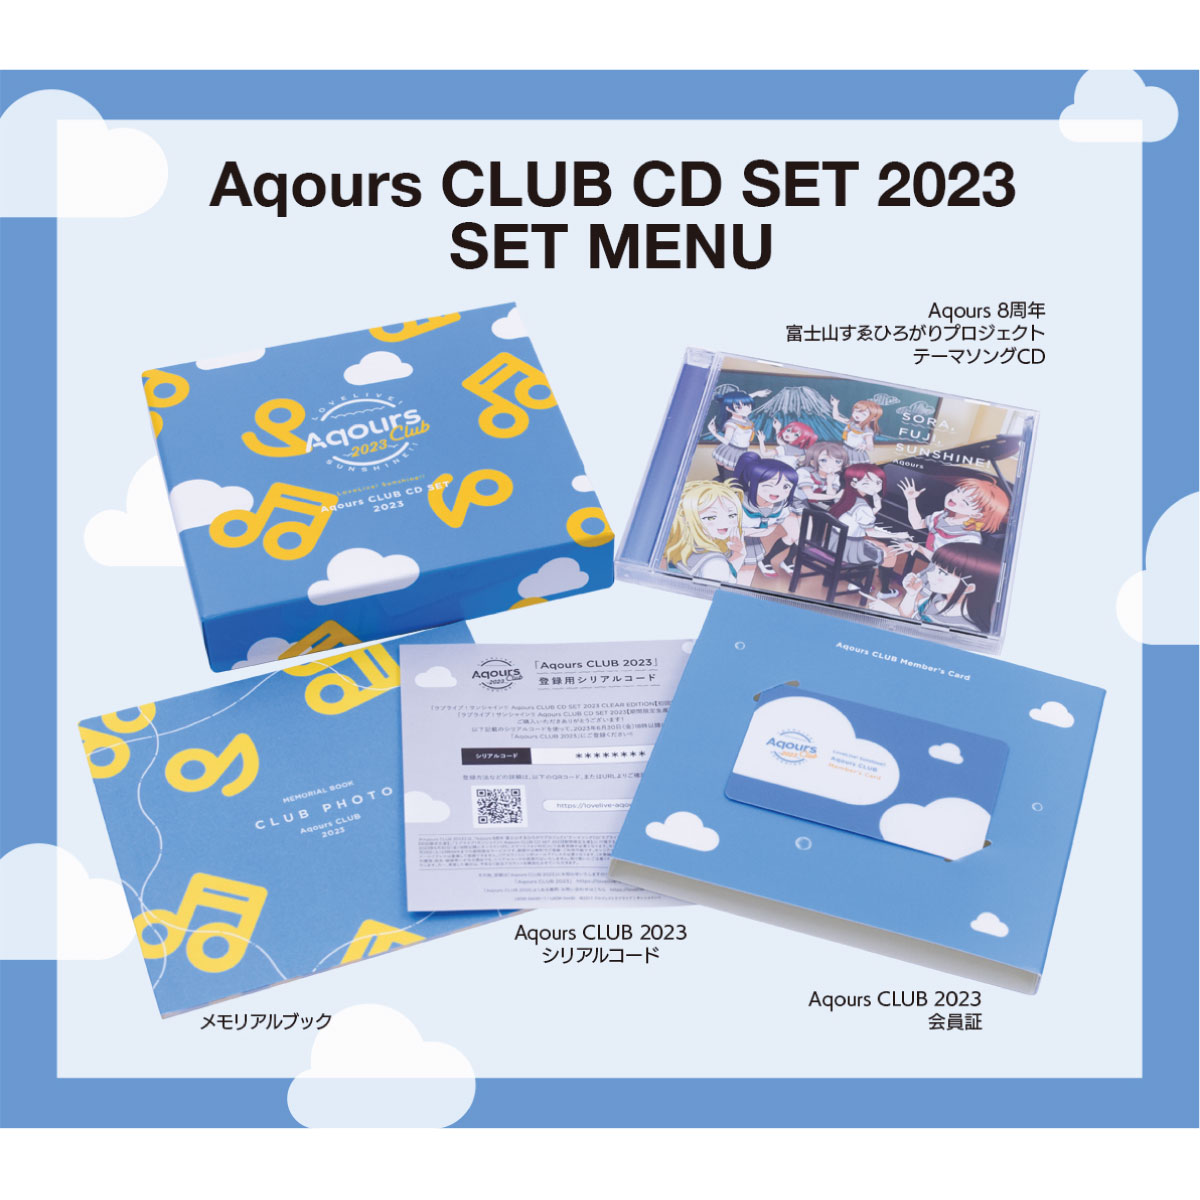 Aqours CLUB CD SET 2023 CLEAR EDITIONアニメ - アニメ